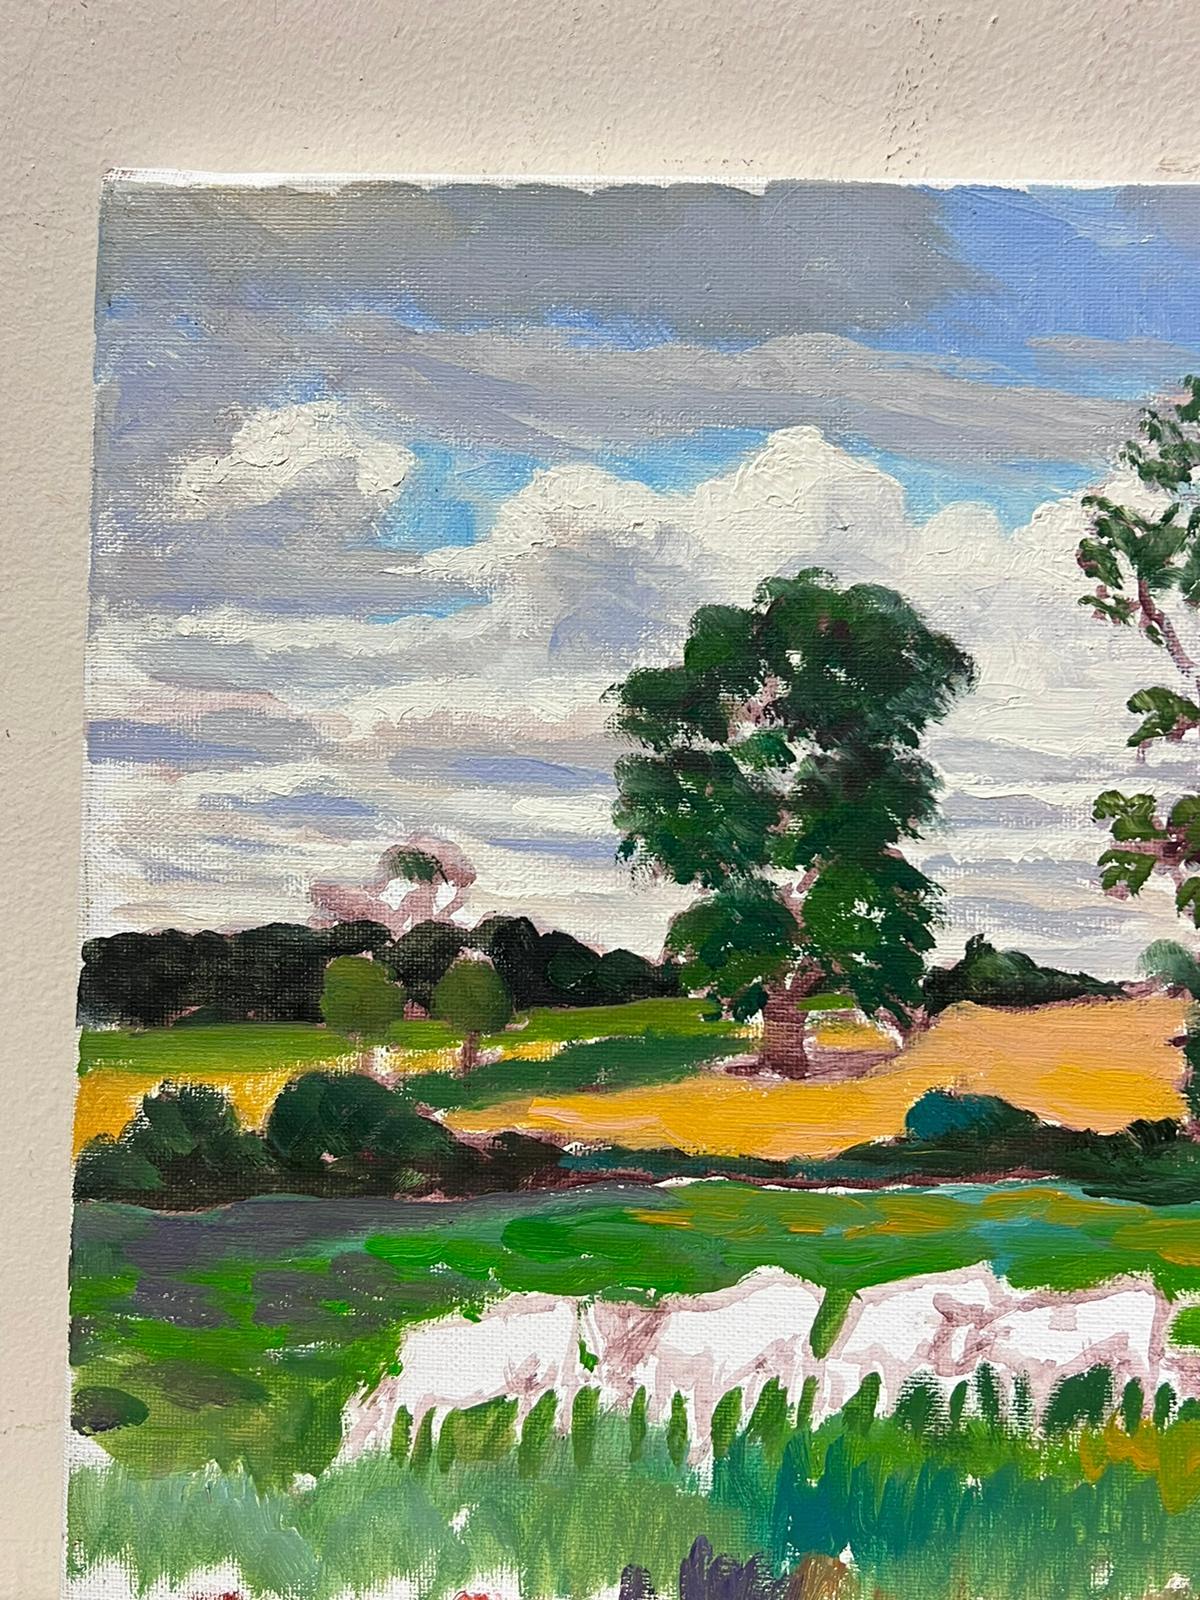 Pastoral Landscape
by Georges Bordonave (French contemporary) 
oil painting on canvas, unframed
canvas: 13 x 16 inches
condition: very good
provenance: from a large private collection of this artists work, western Paris, France. 